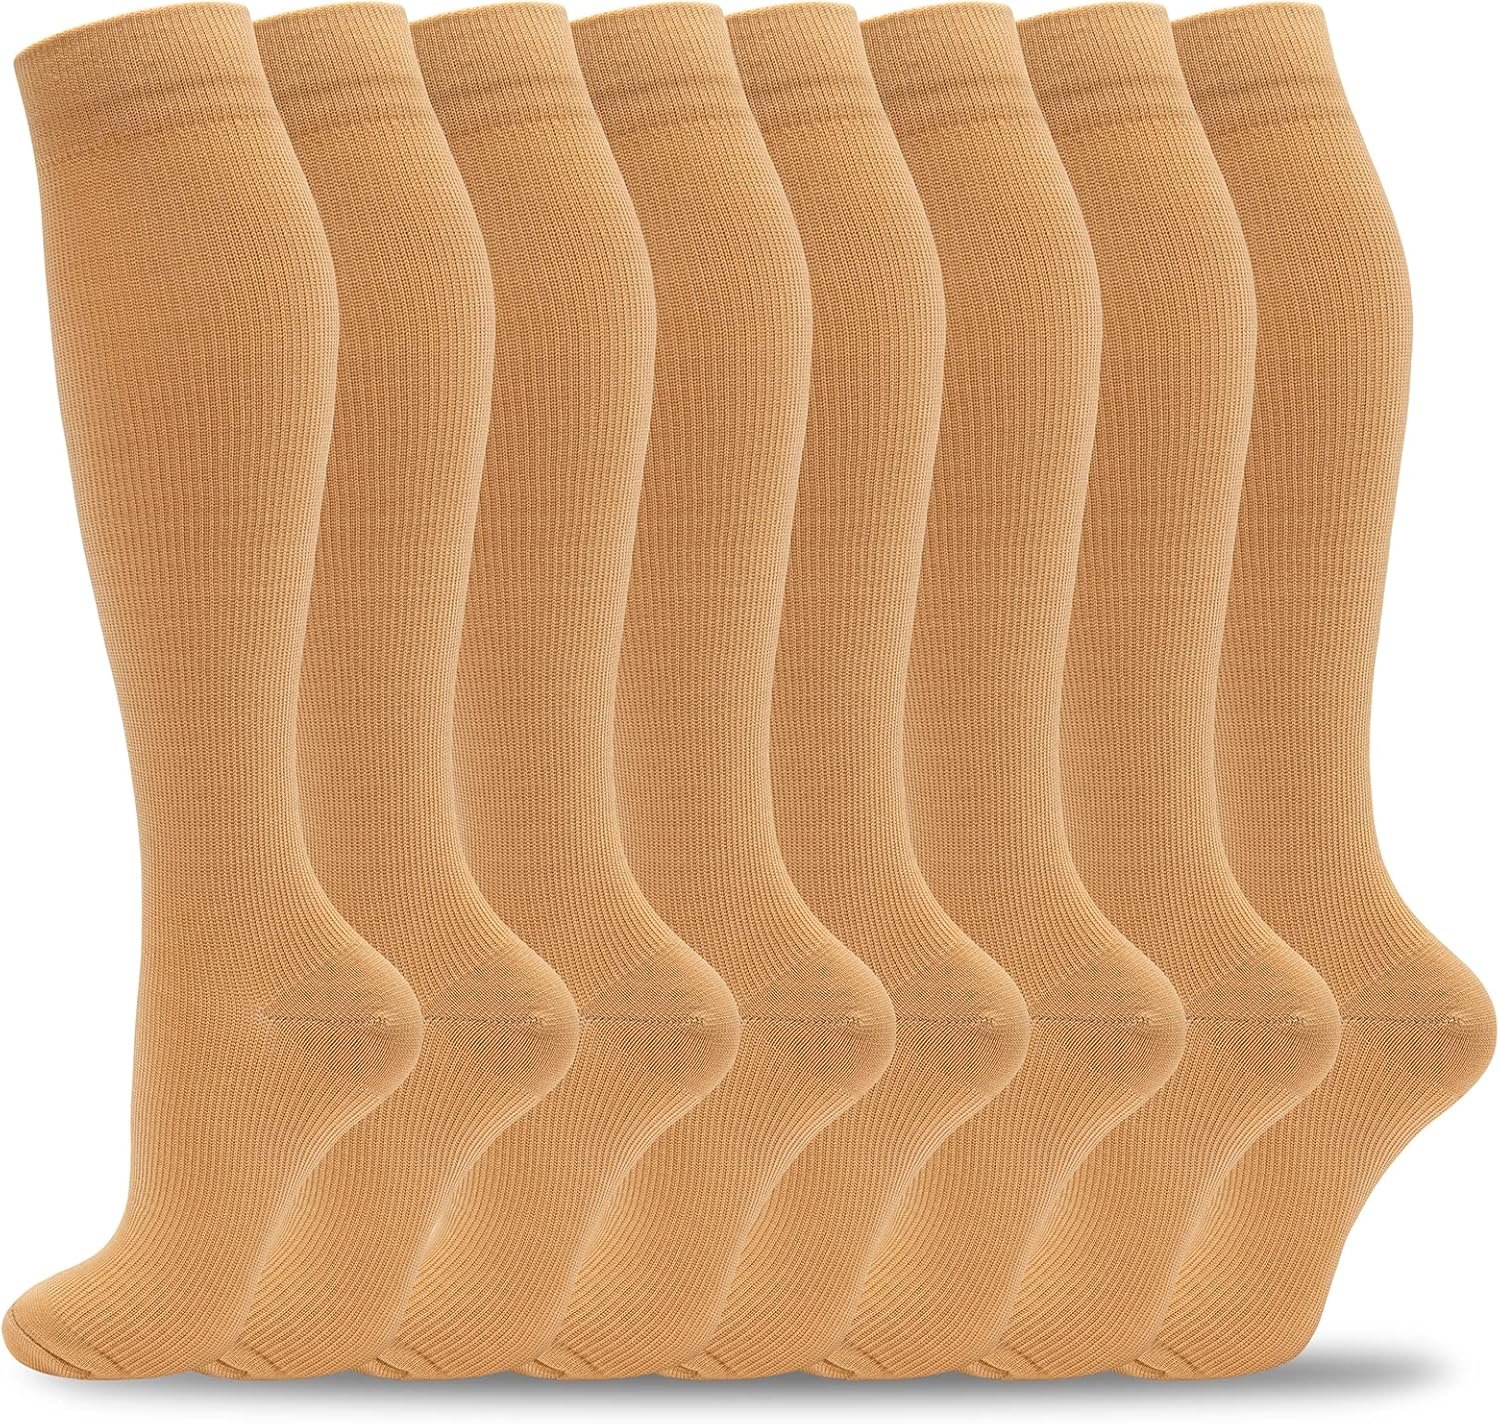 Compression Socks 8 Pairs Review